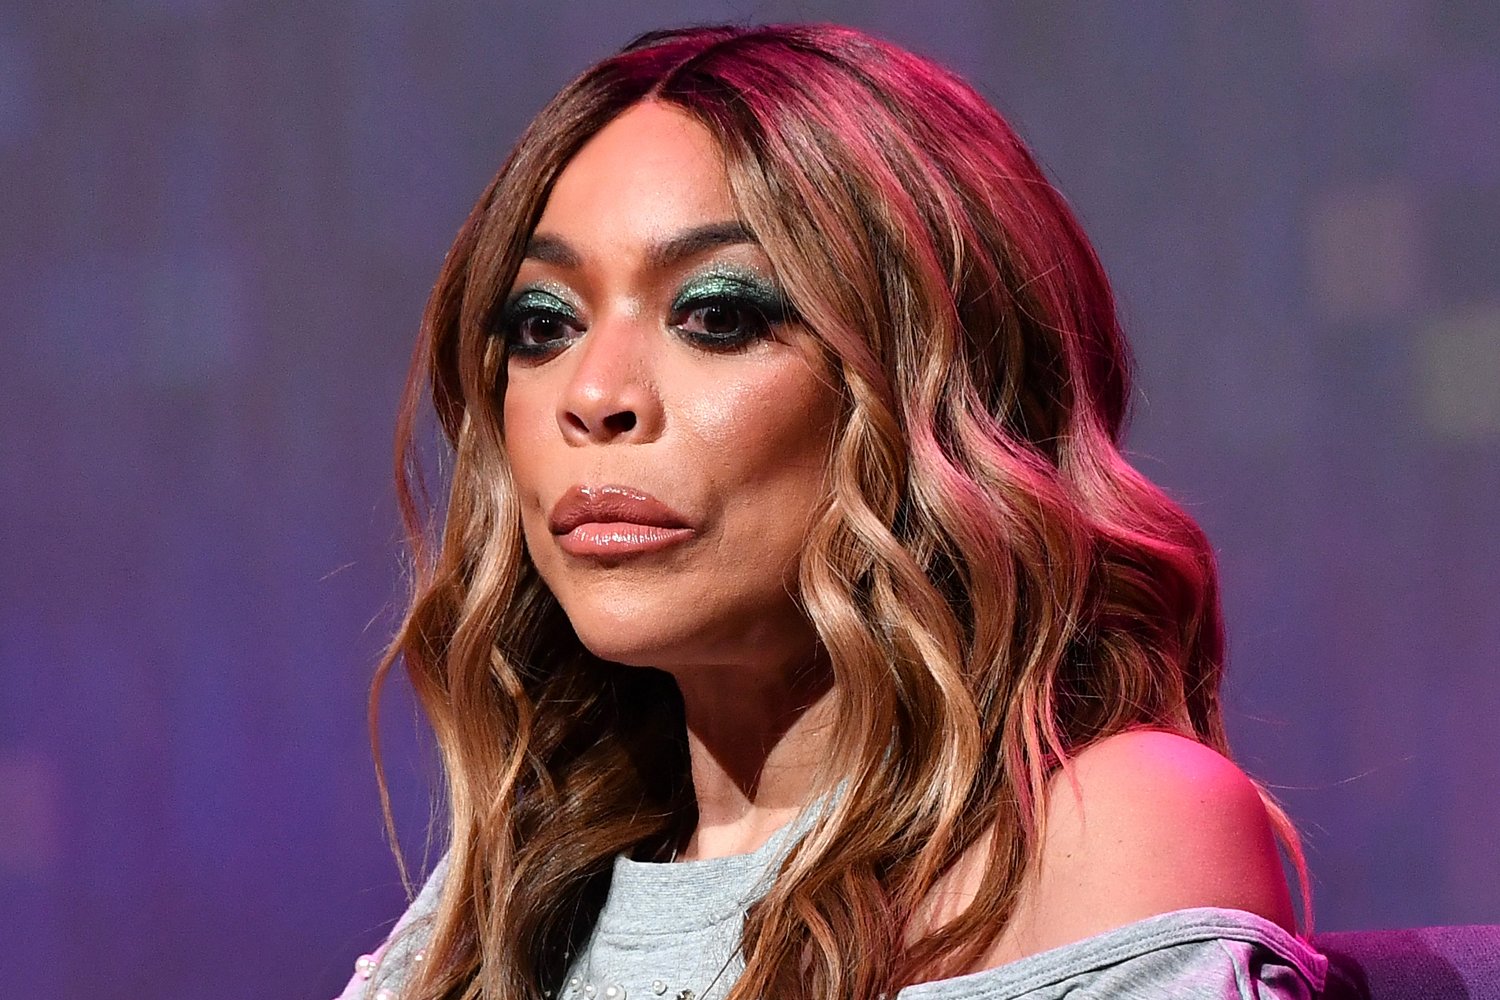 Wendy Williams looking down and frowning